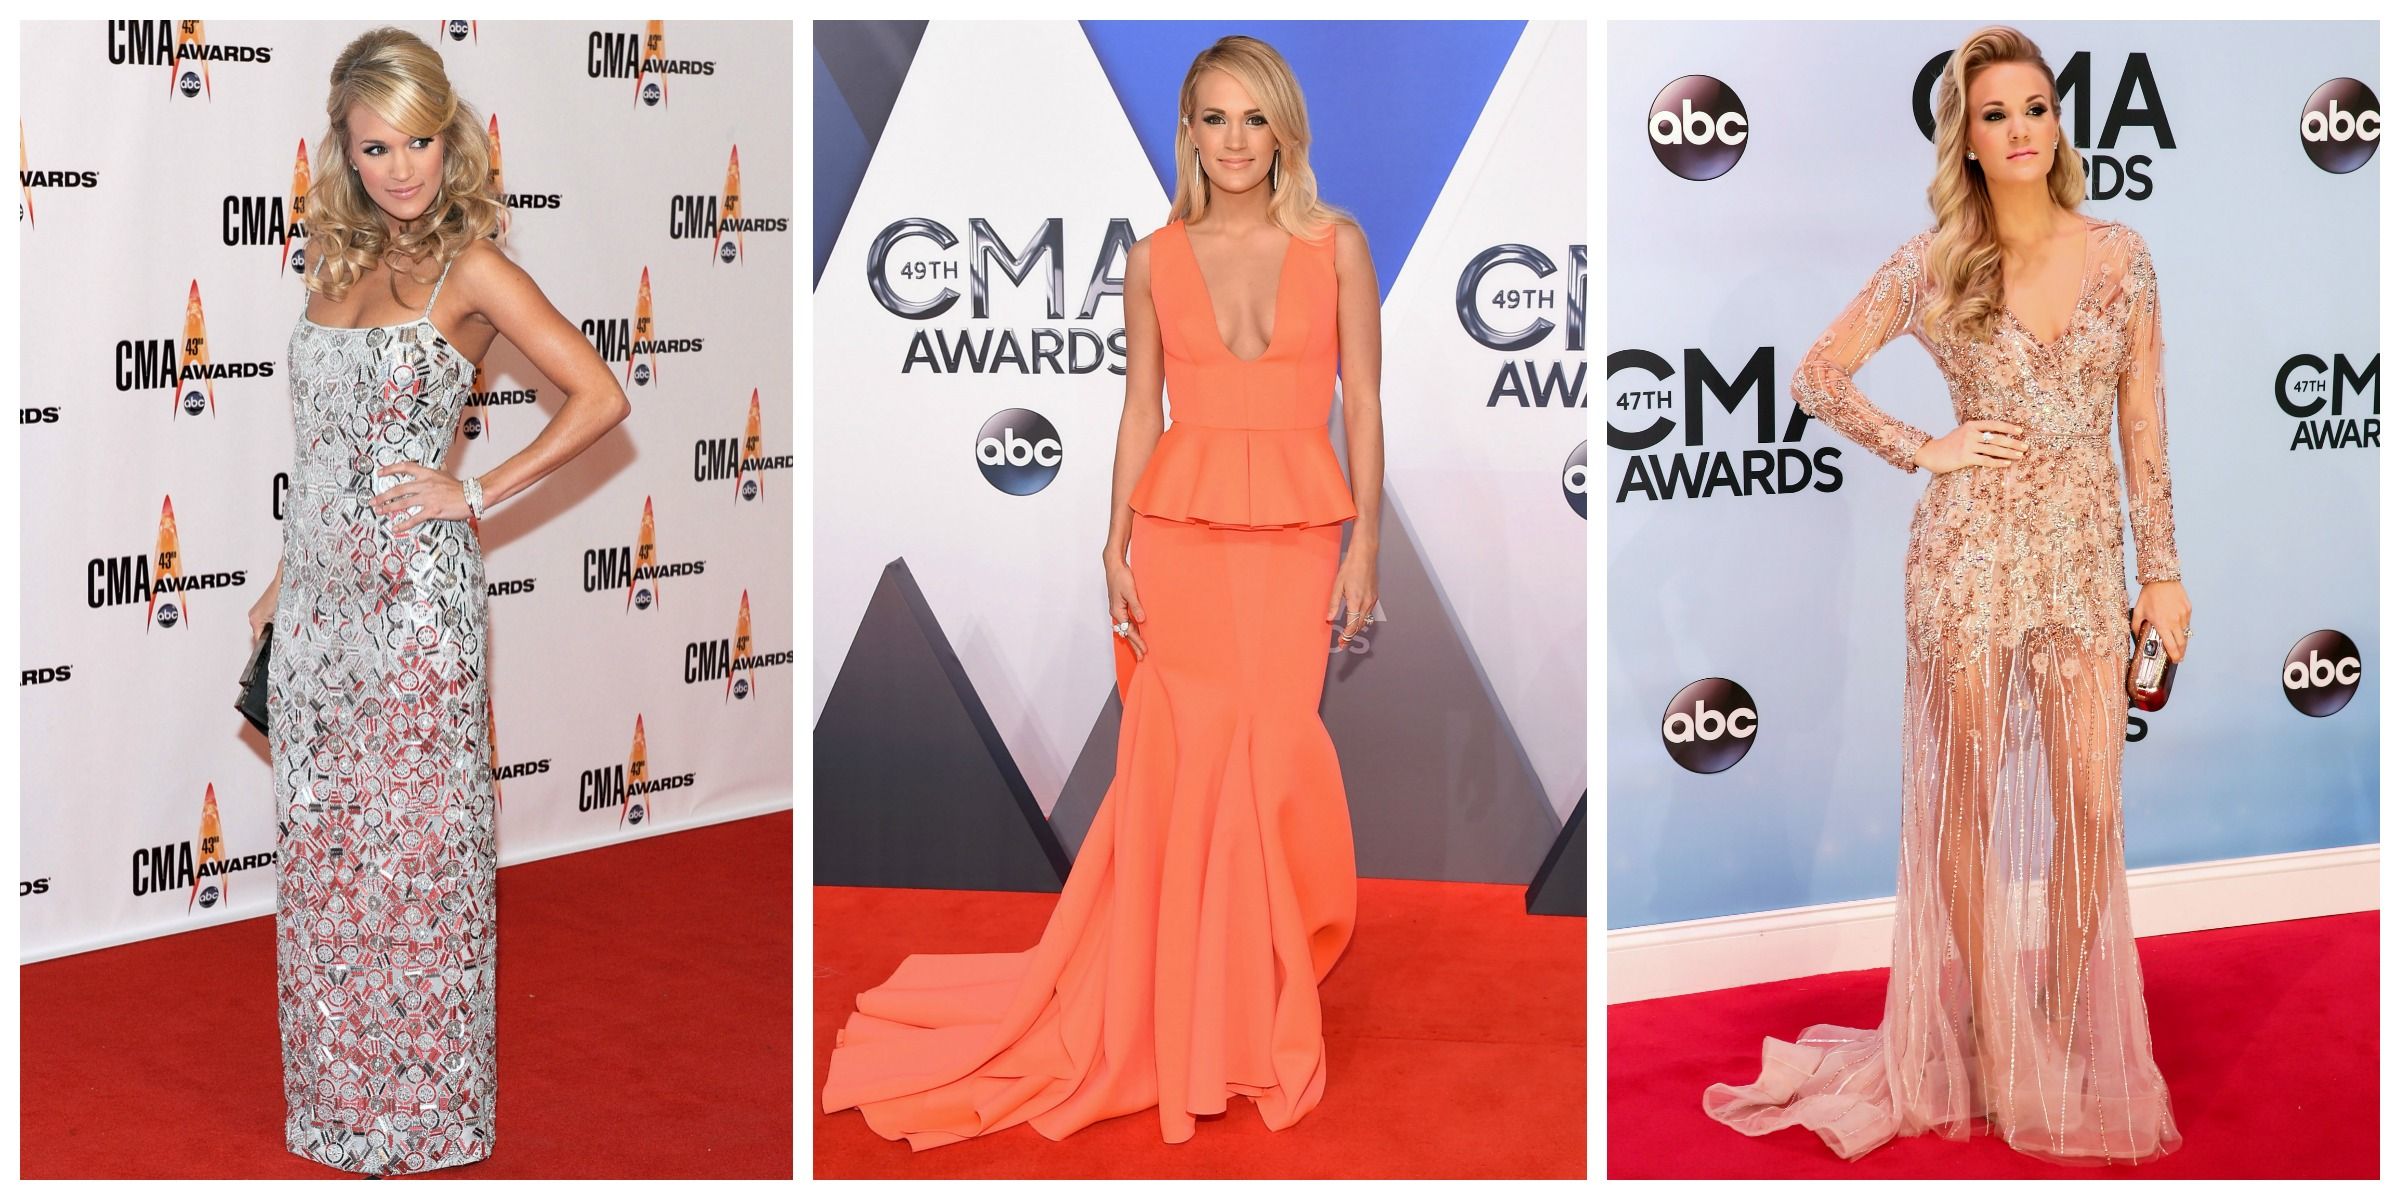 Carrie Underwood Wore a See-Through Outfit Ahead of CMA Awards and